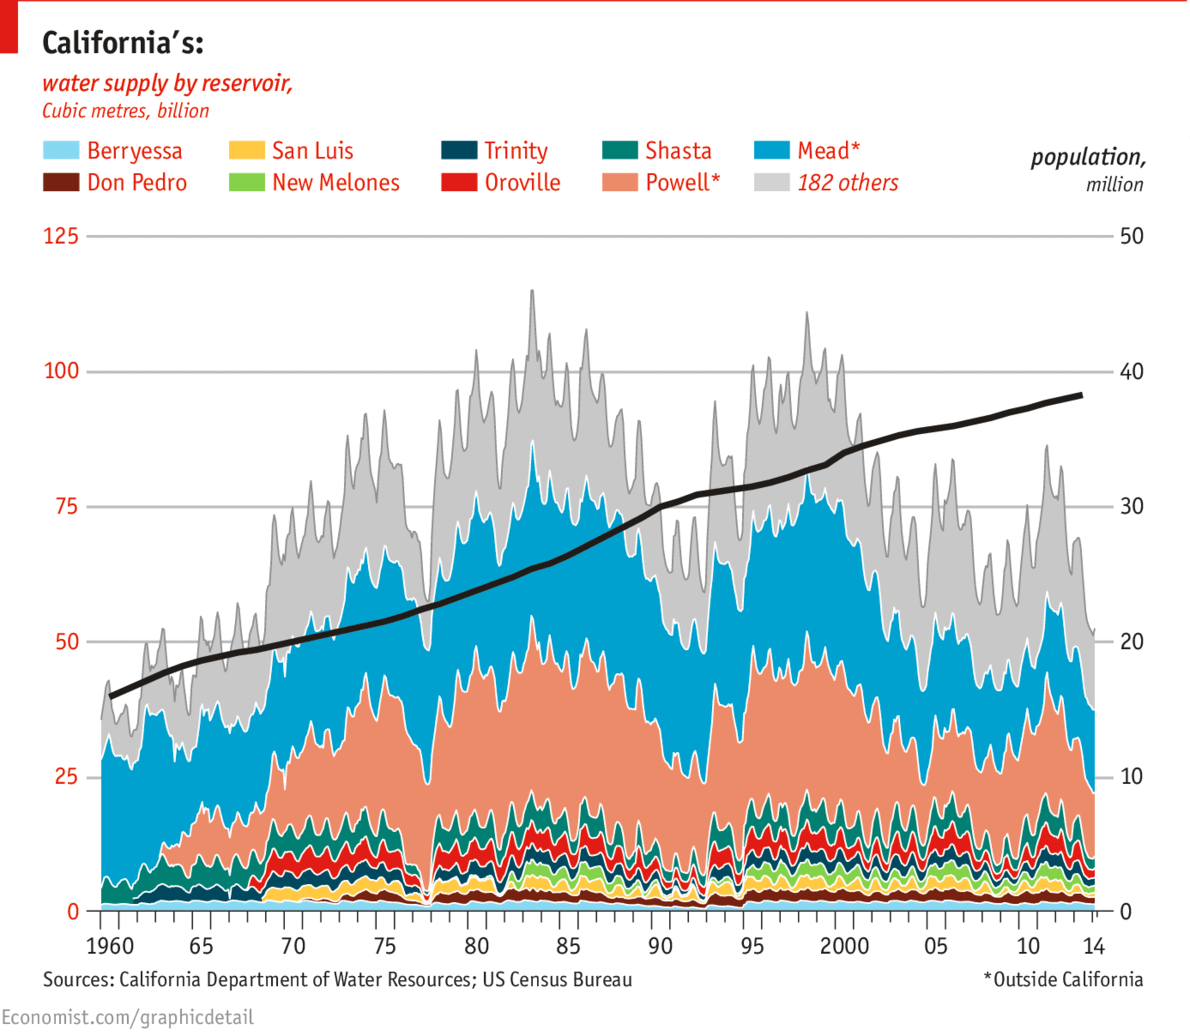 Stacked area graph illustrating historical water supplies in California, from The Economist